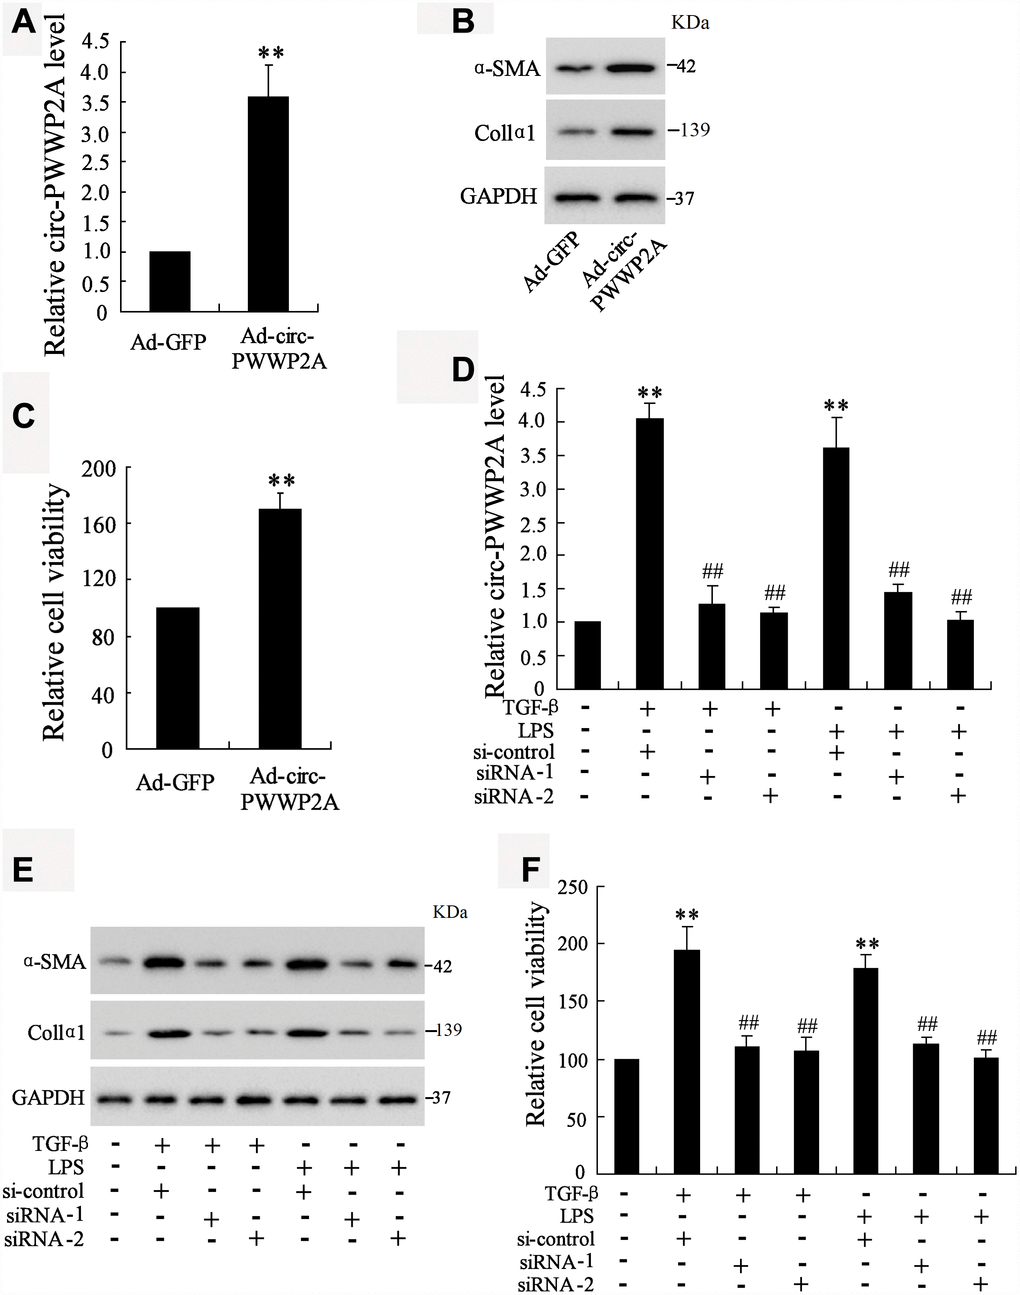 Effect of circ-PWWP2A on activation and proliferation of HSCs. (A) Overexpressing circ-PWWP2A was done by transfecting Ad-circ-PWWP2A into LX-2 cells. (B) Protein expression of α-SMA and Col1α1, both of which were activated HSC markers. (C) HSC proliferation was detected using CCK-8 assay. (D) Interfering circ-PWWP2A was done by transfecting siRNA of circ-PWWP2A (siRNA-1 and siRNA-2) in TGF-β- or LPS-activated LX-2 cells. (E) Protein expression of α-SMA and Col1α1. (F) Cell proliferation of activated-HSCs. **p